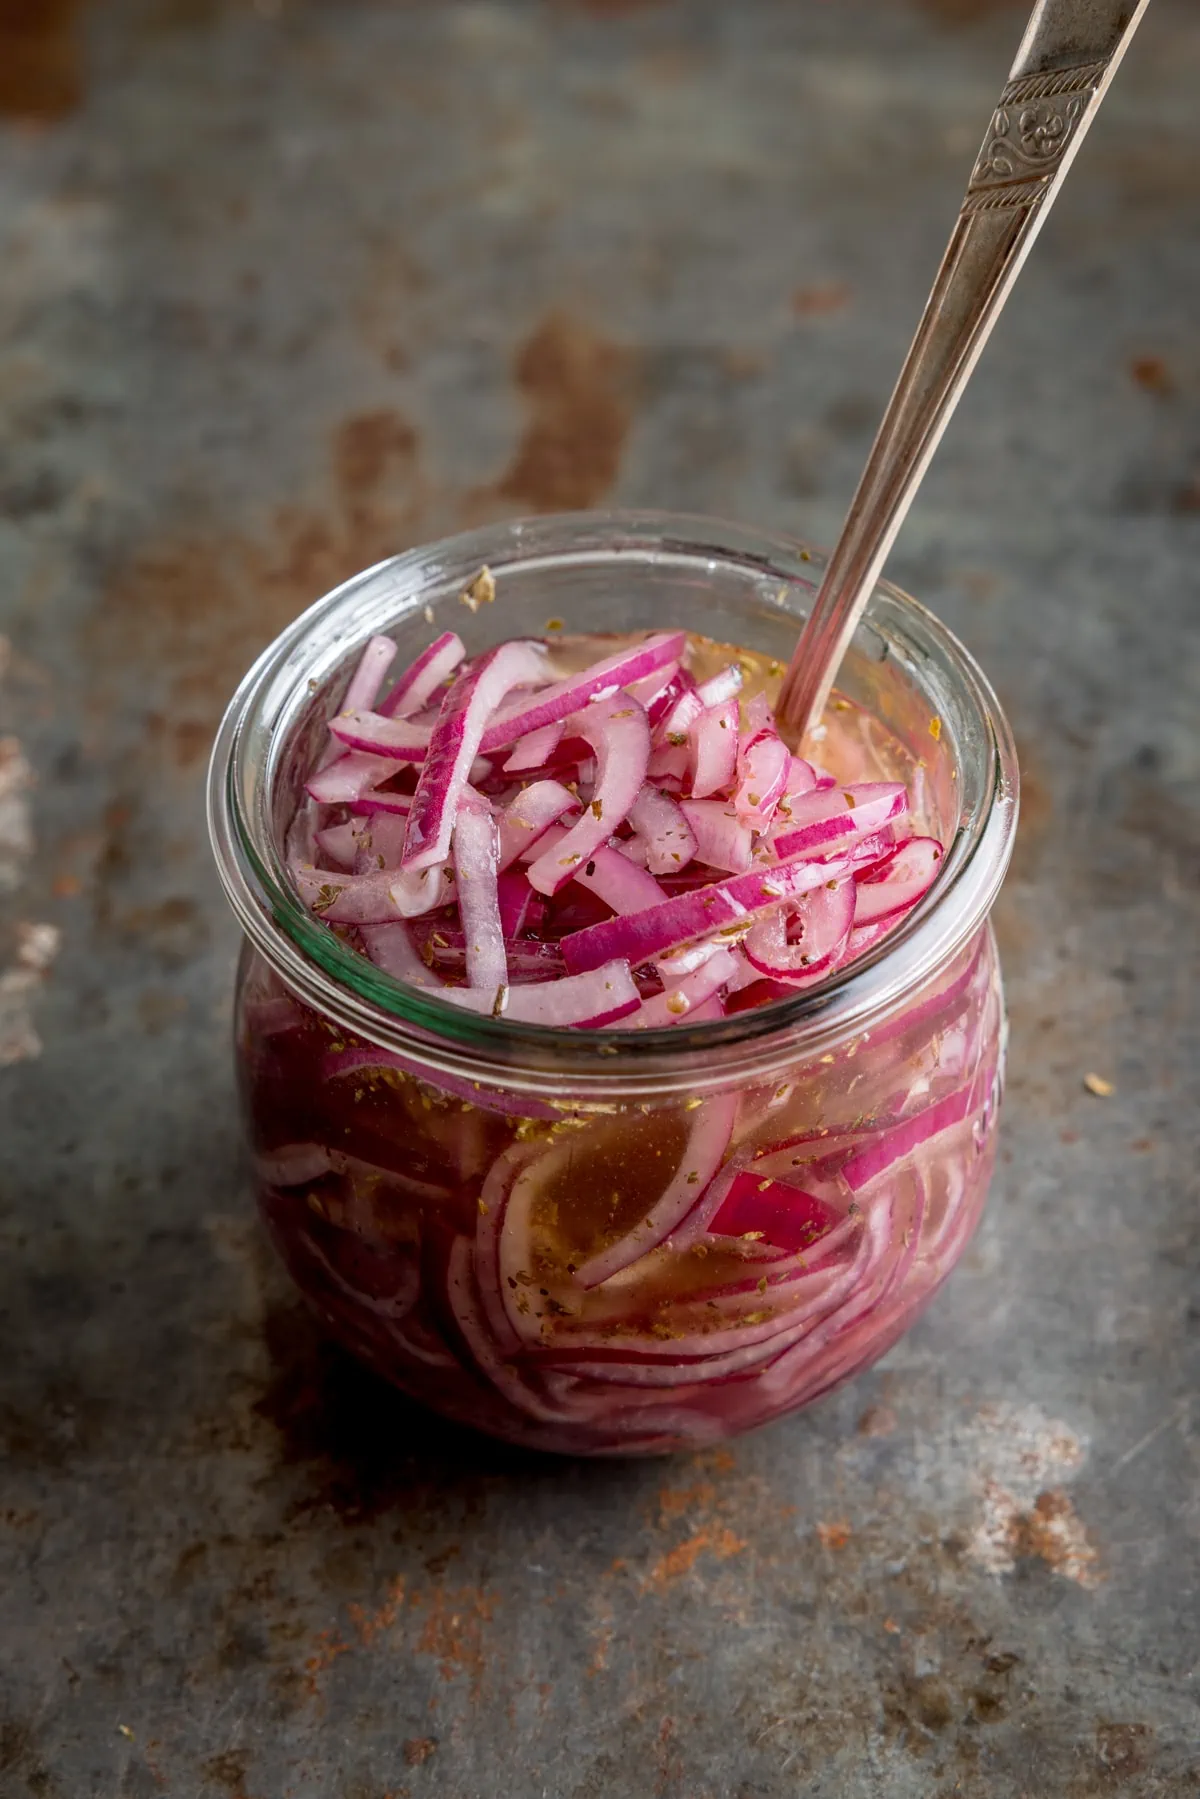 Marinated sliced red onions in a glass jar with a metal spoon sticking out. The jar is on a vintage steel surface.